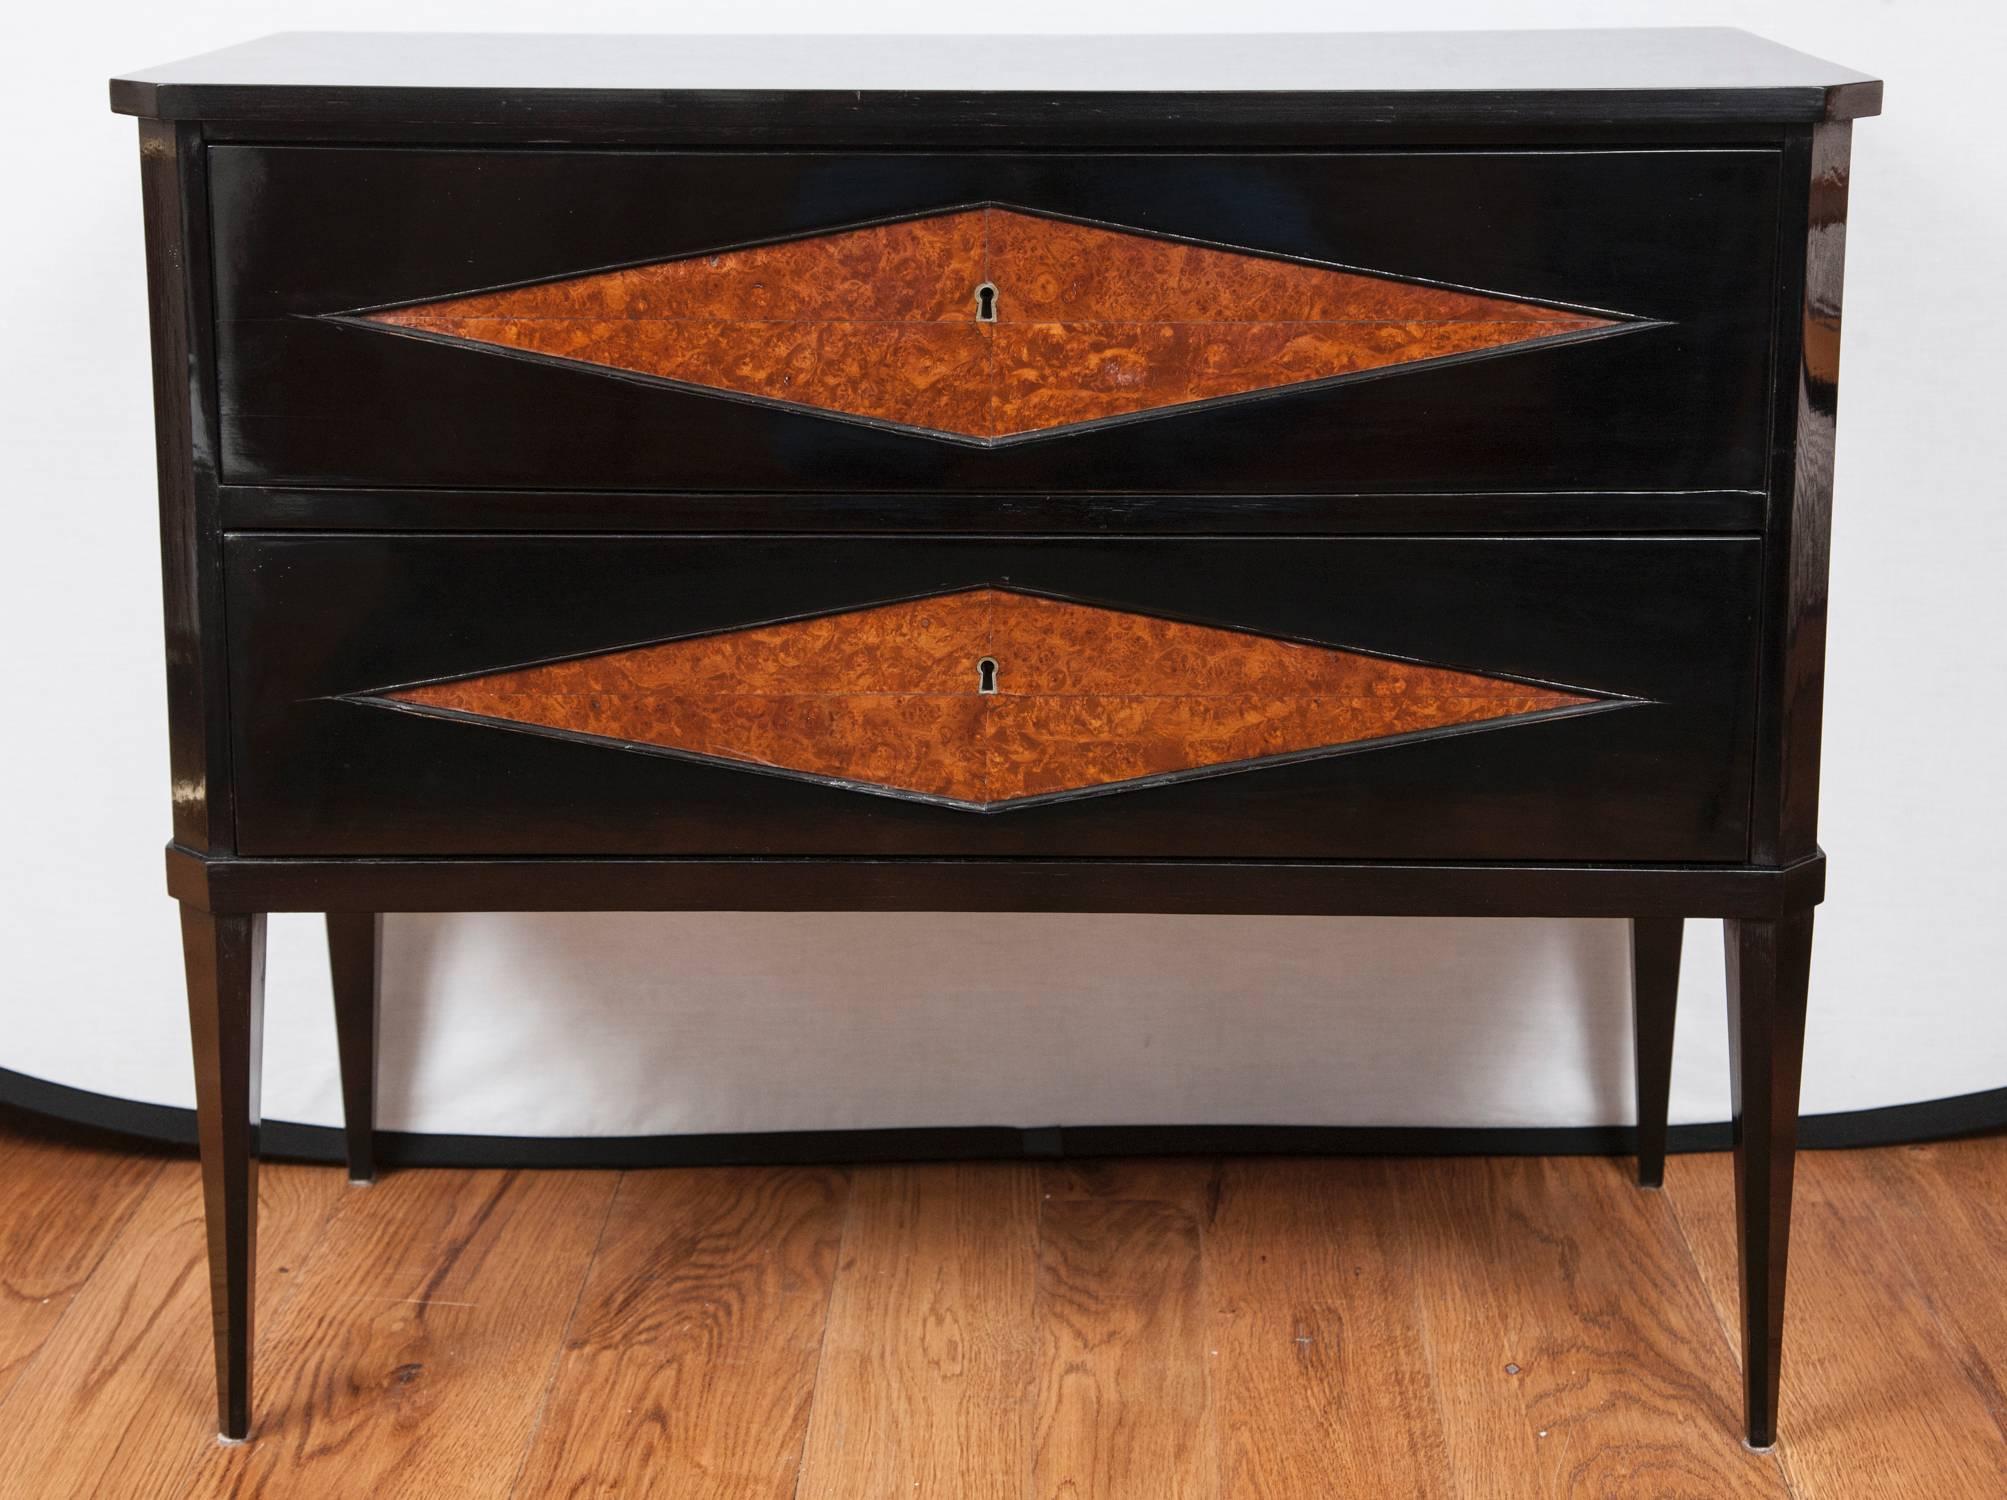 Stunning pair of Continental decorative vintage two drawer chests with inlaid burl wood diamond shaped front panels finishing on high tapered and angular legs, shown in a hand lacquered polish, working keys provided for each drawer.
In excellent